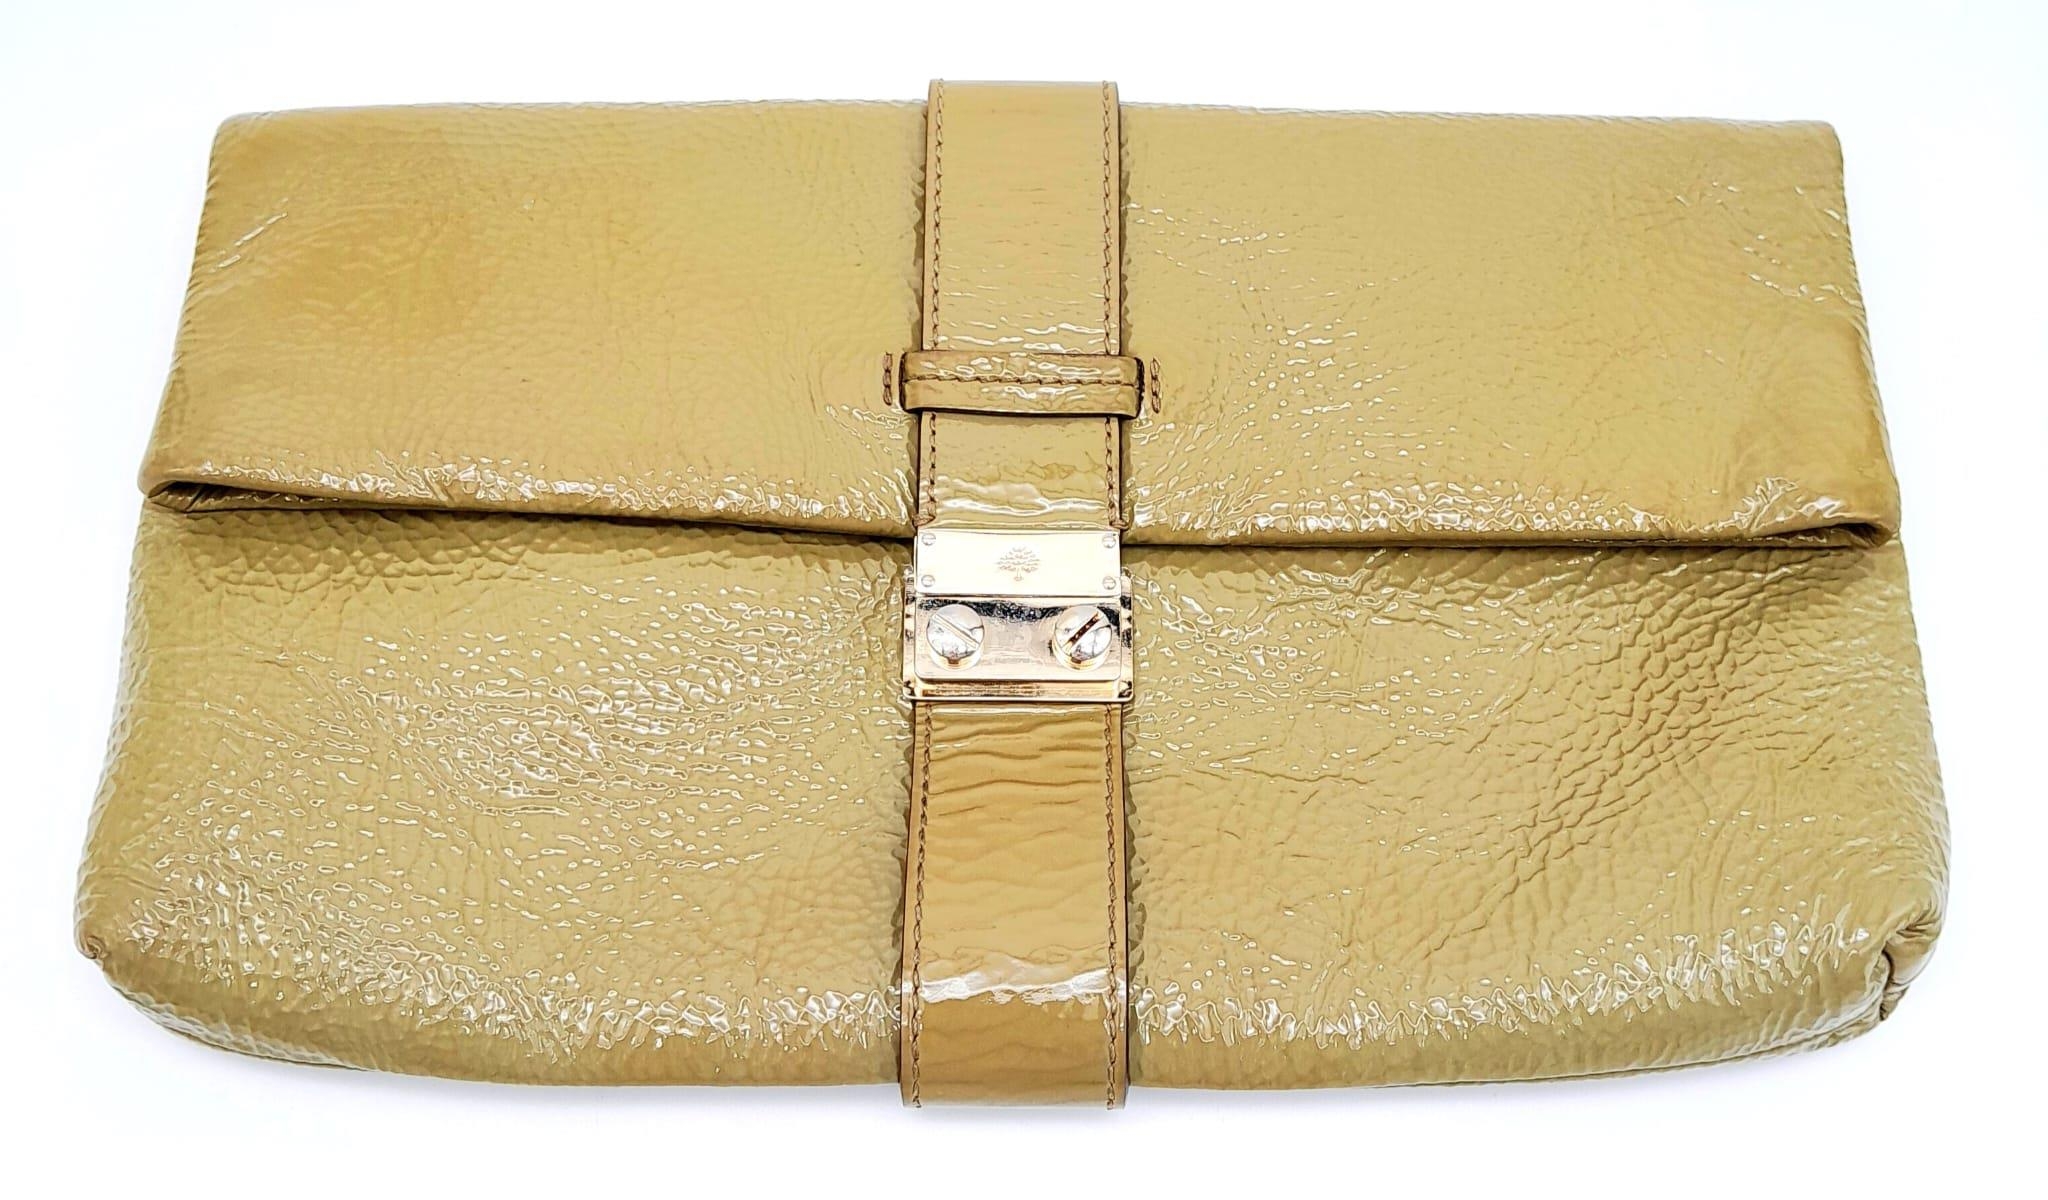 A Mulberry Harriet Khaki Leather Clutch Bag. Spongy patent leather exterior with gold-tone hardware,